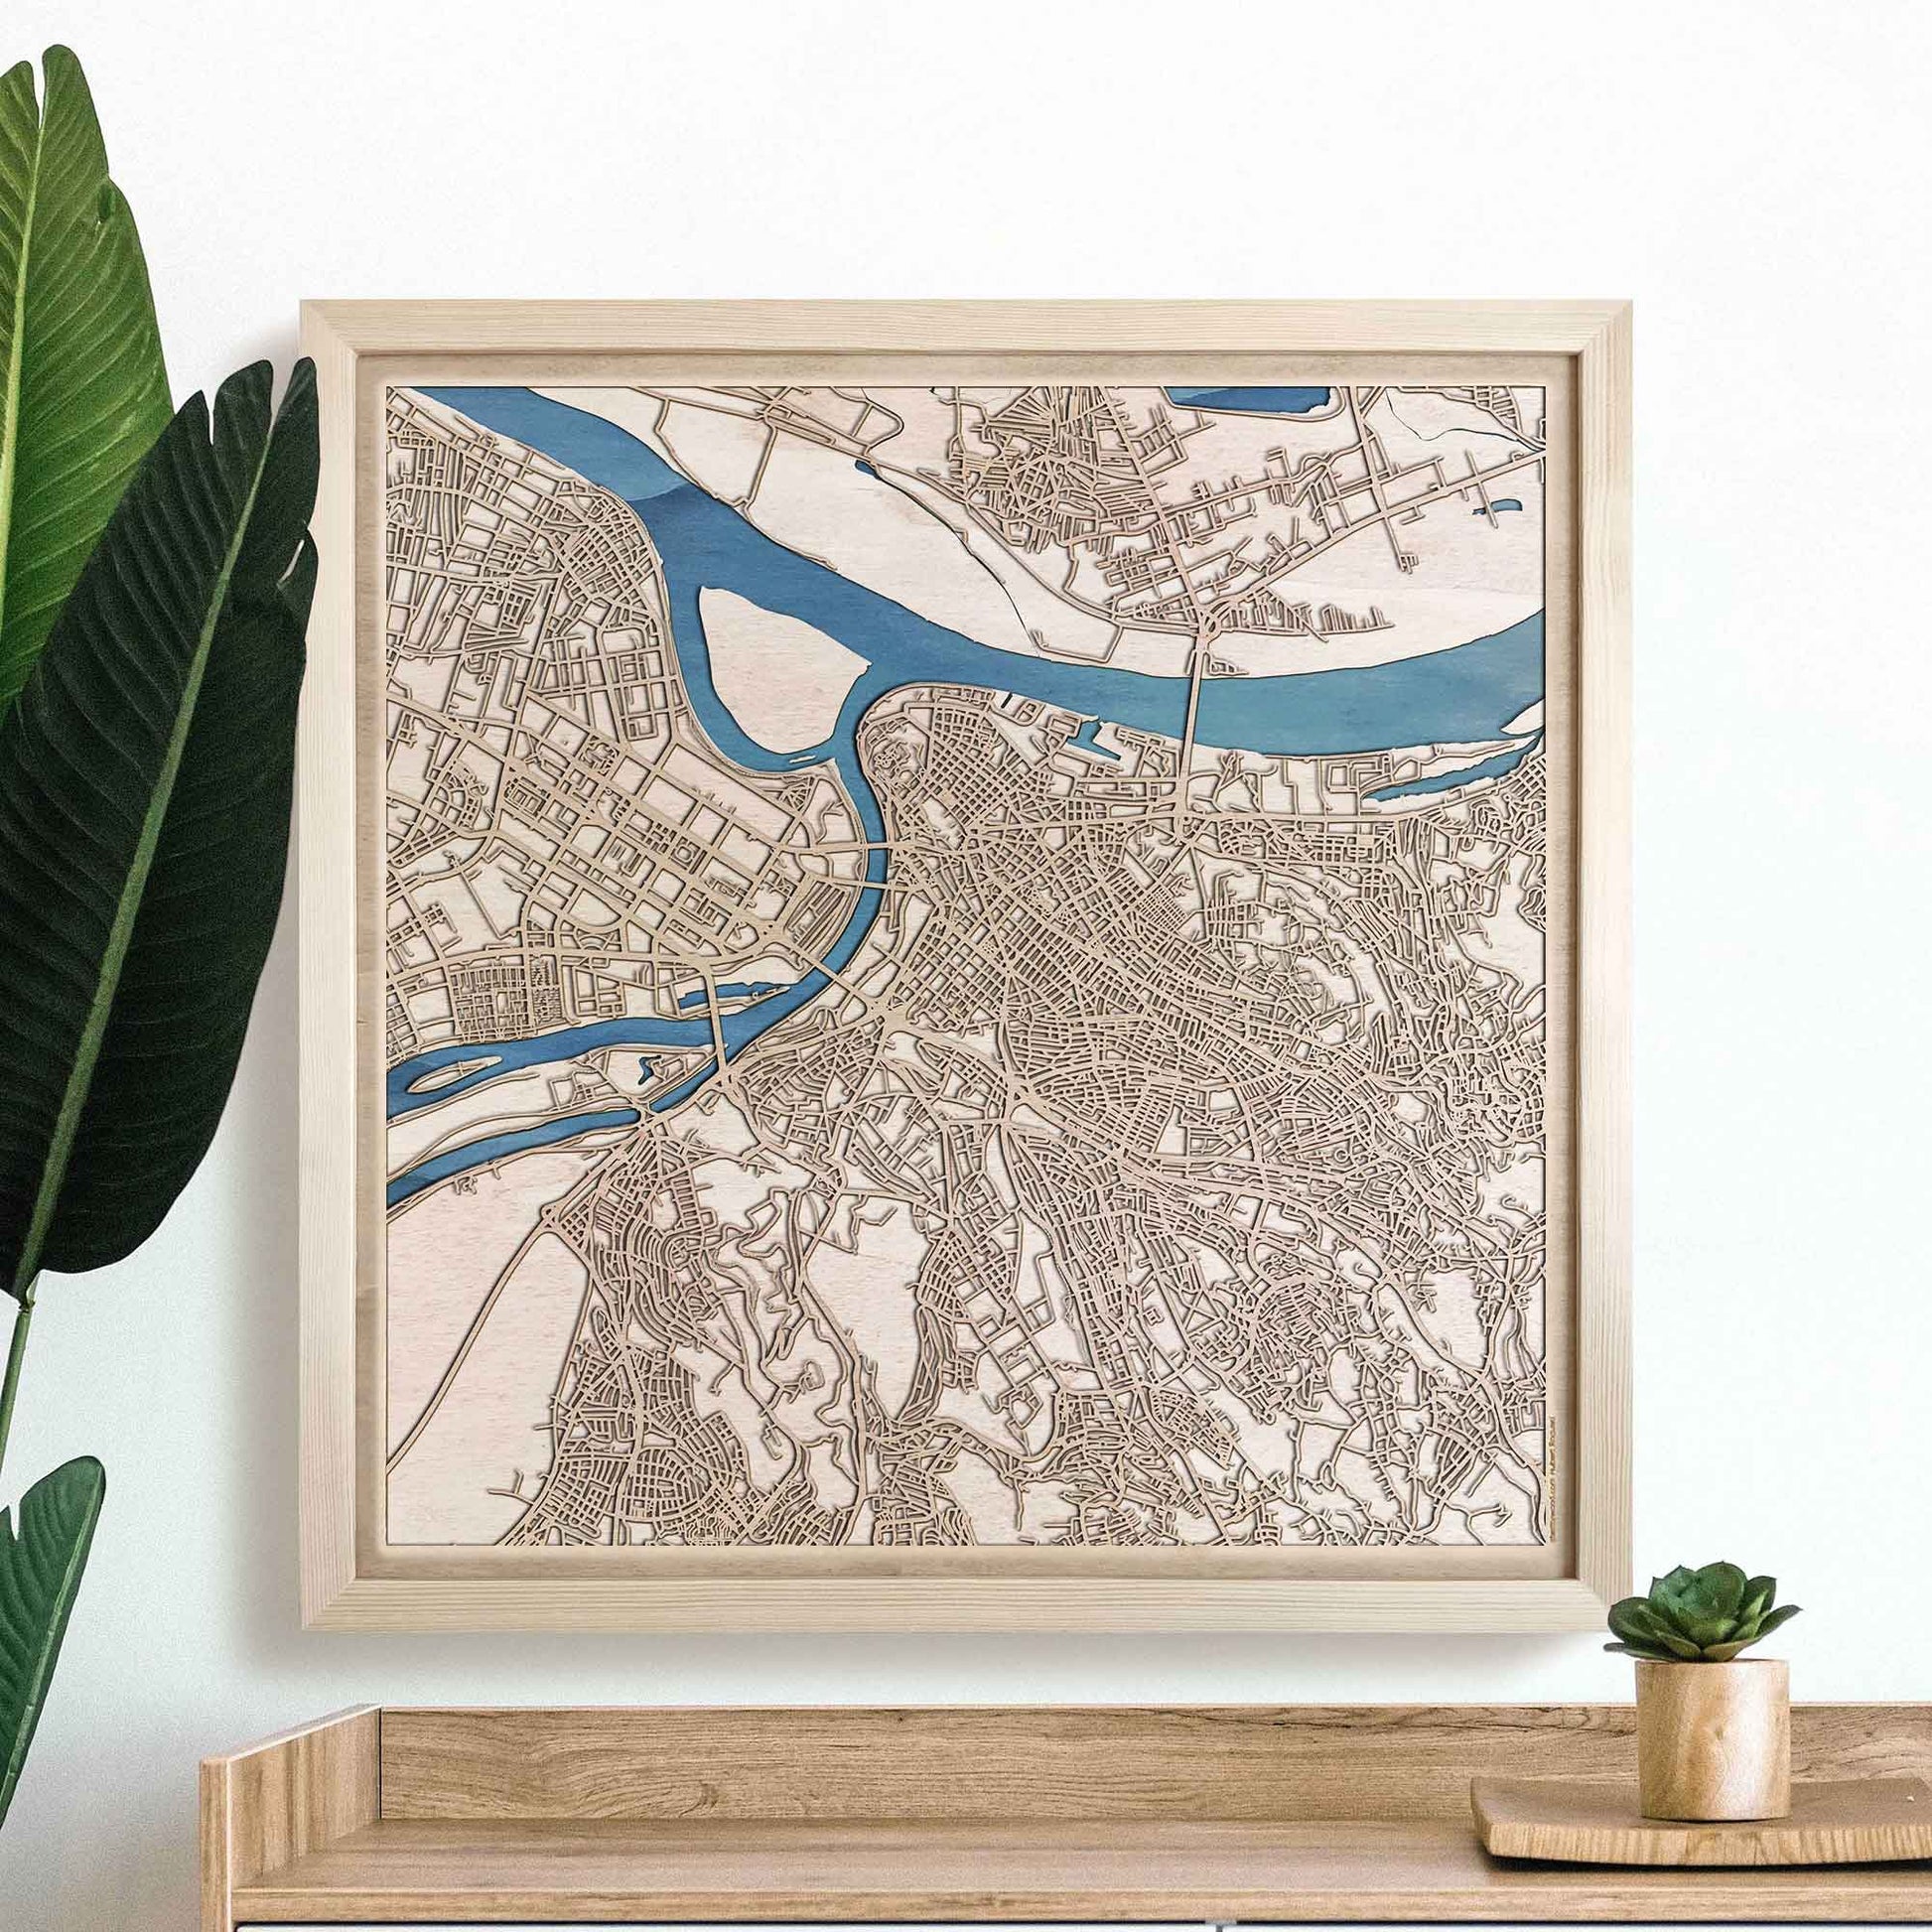 Belgrade Wooden Map by CityWood - Custom Wood Map Art - Unique Laser Cut Engraved - Anniversary Gift